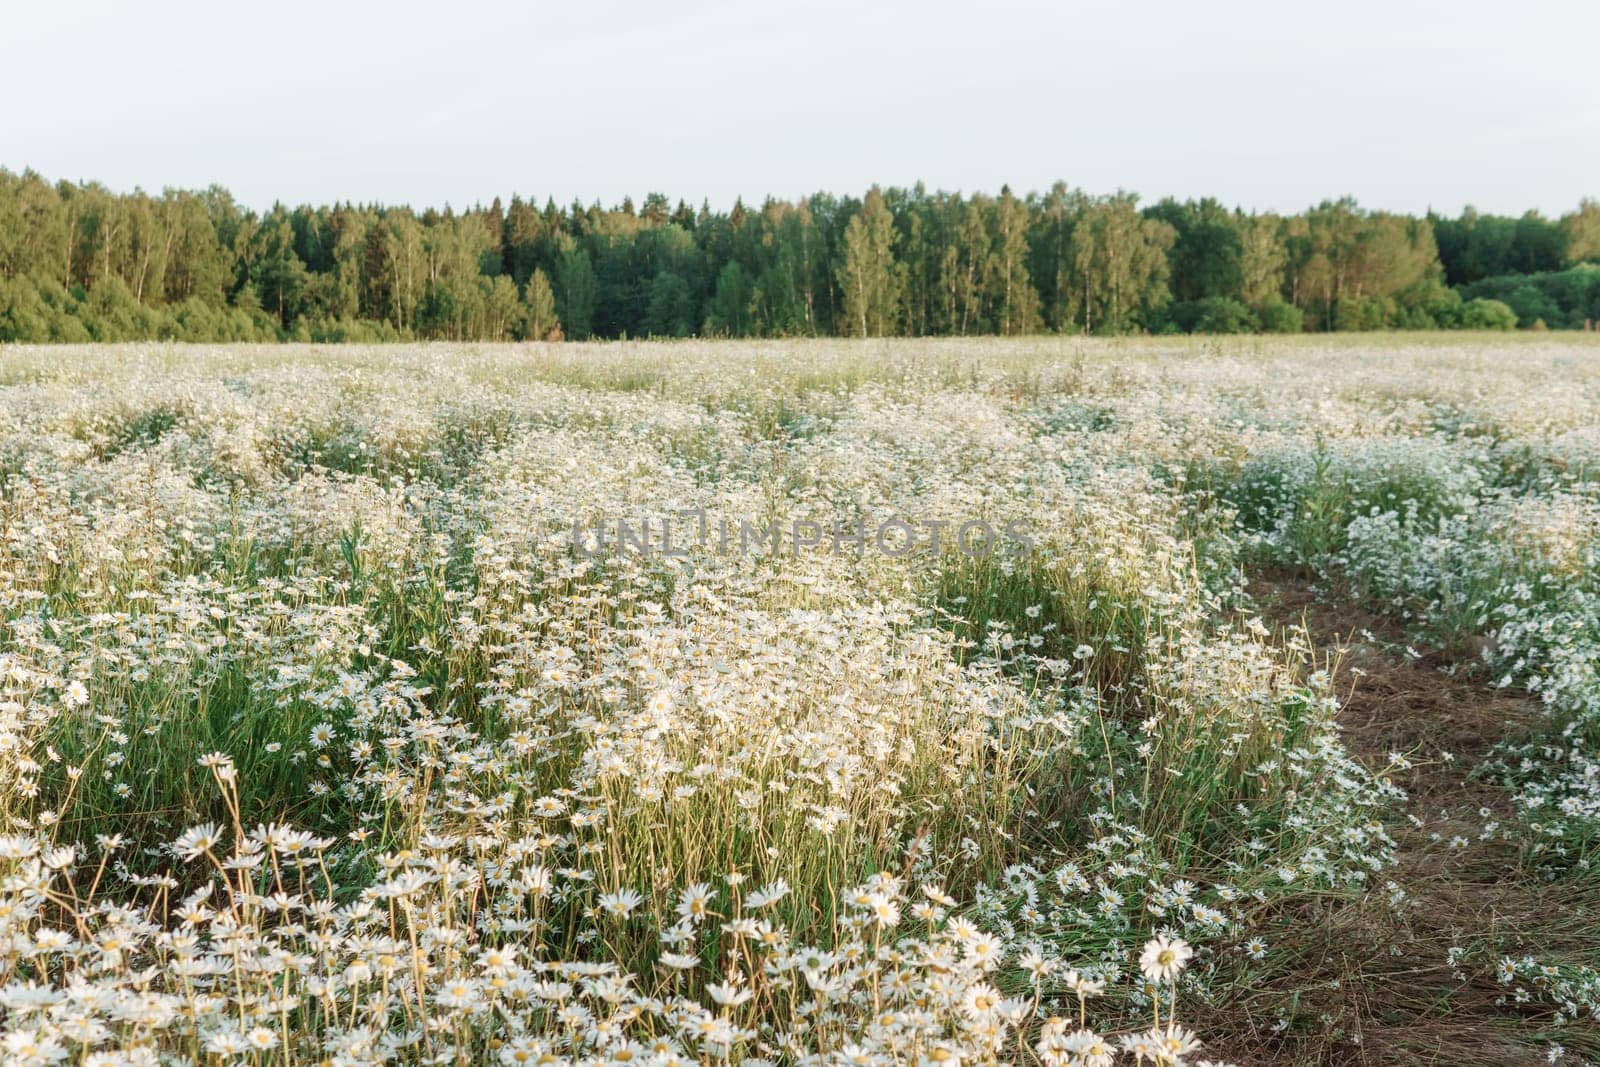 A spacious chamomile field in summer. A large field of flowering daisies. The concept of agriculture and the cultivation of useful medicinal herbs